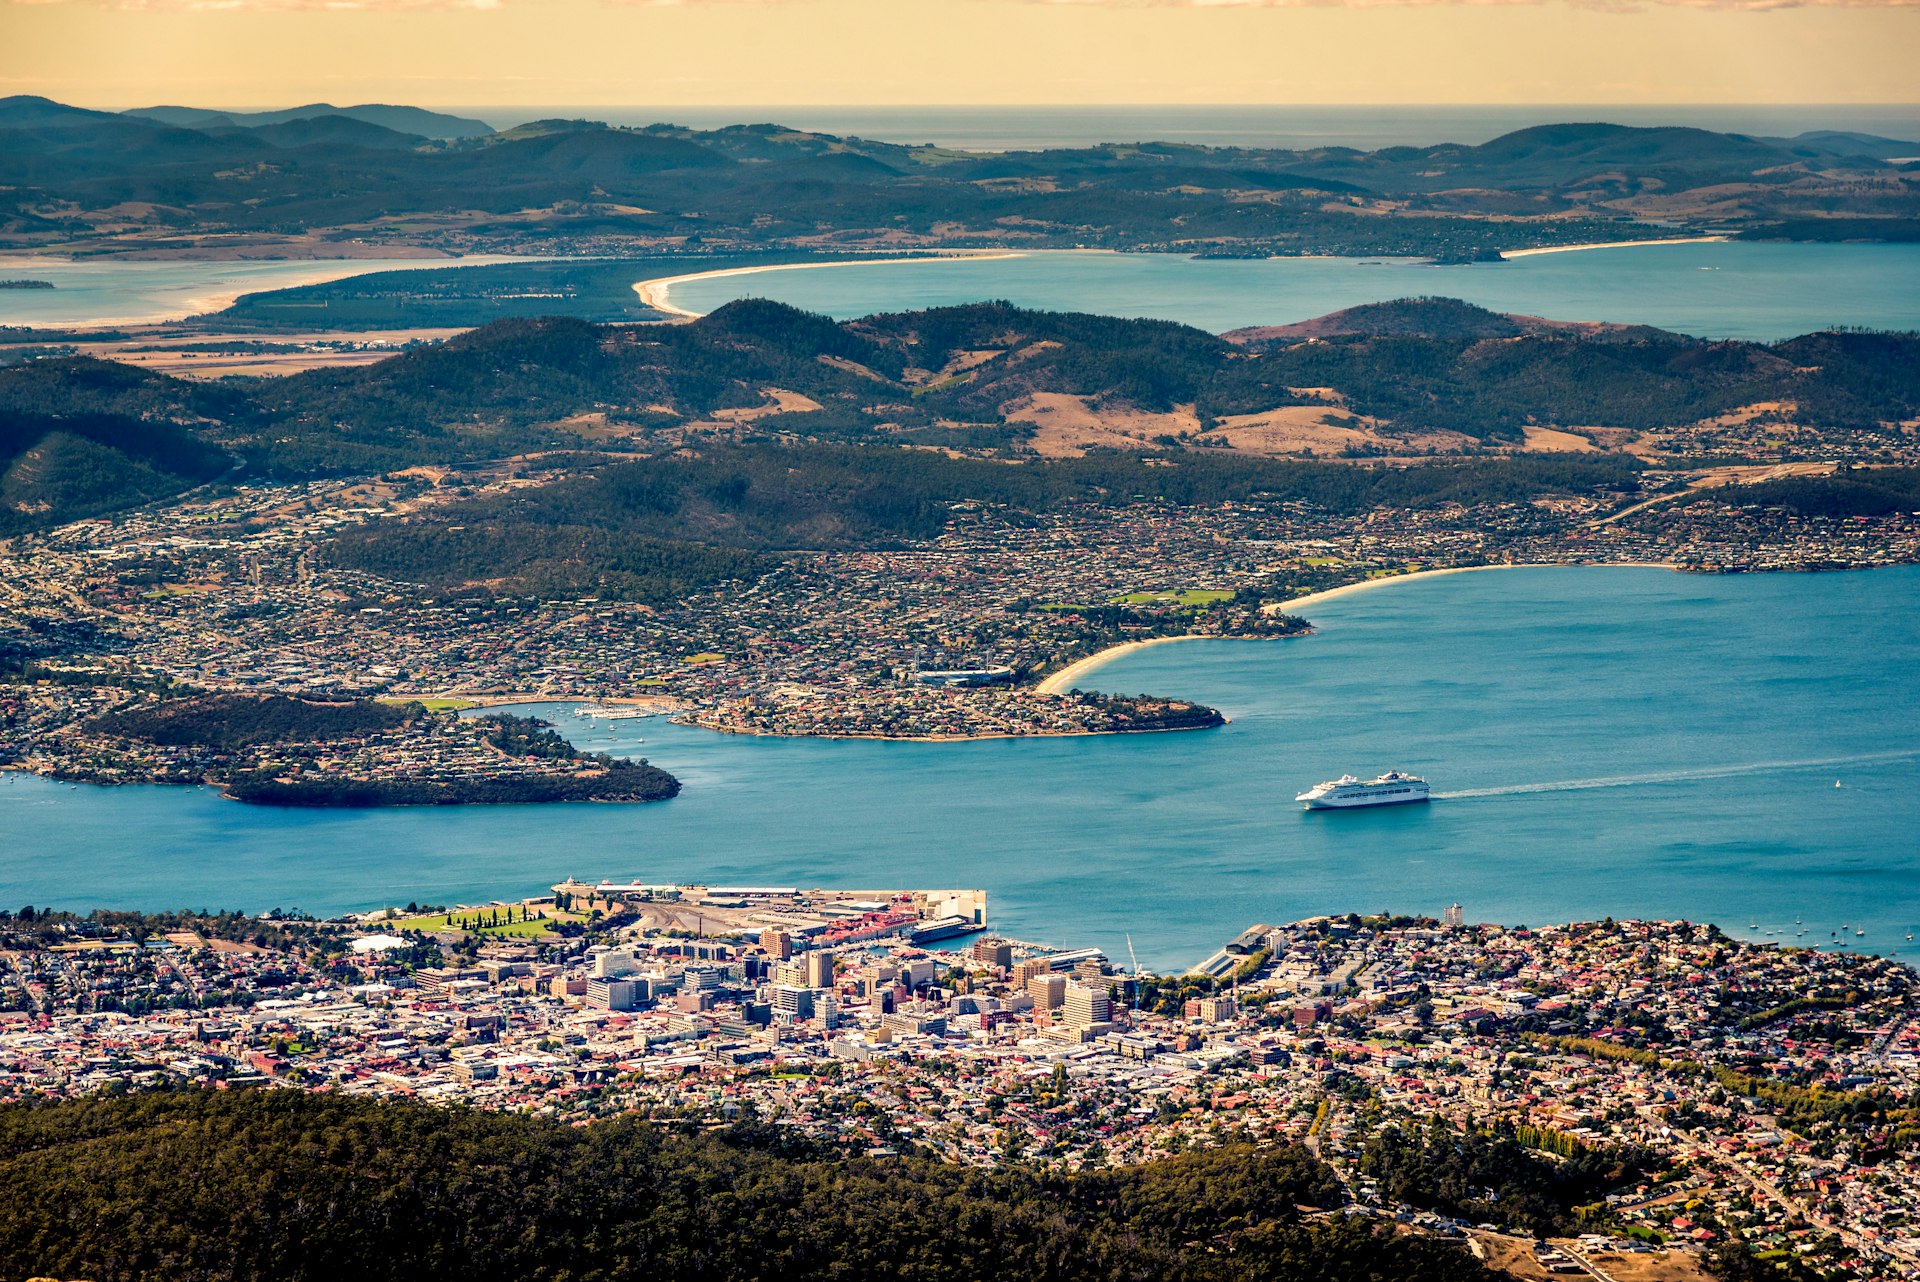 View of Hobart from the top of mt Wellington, Tasmania